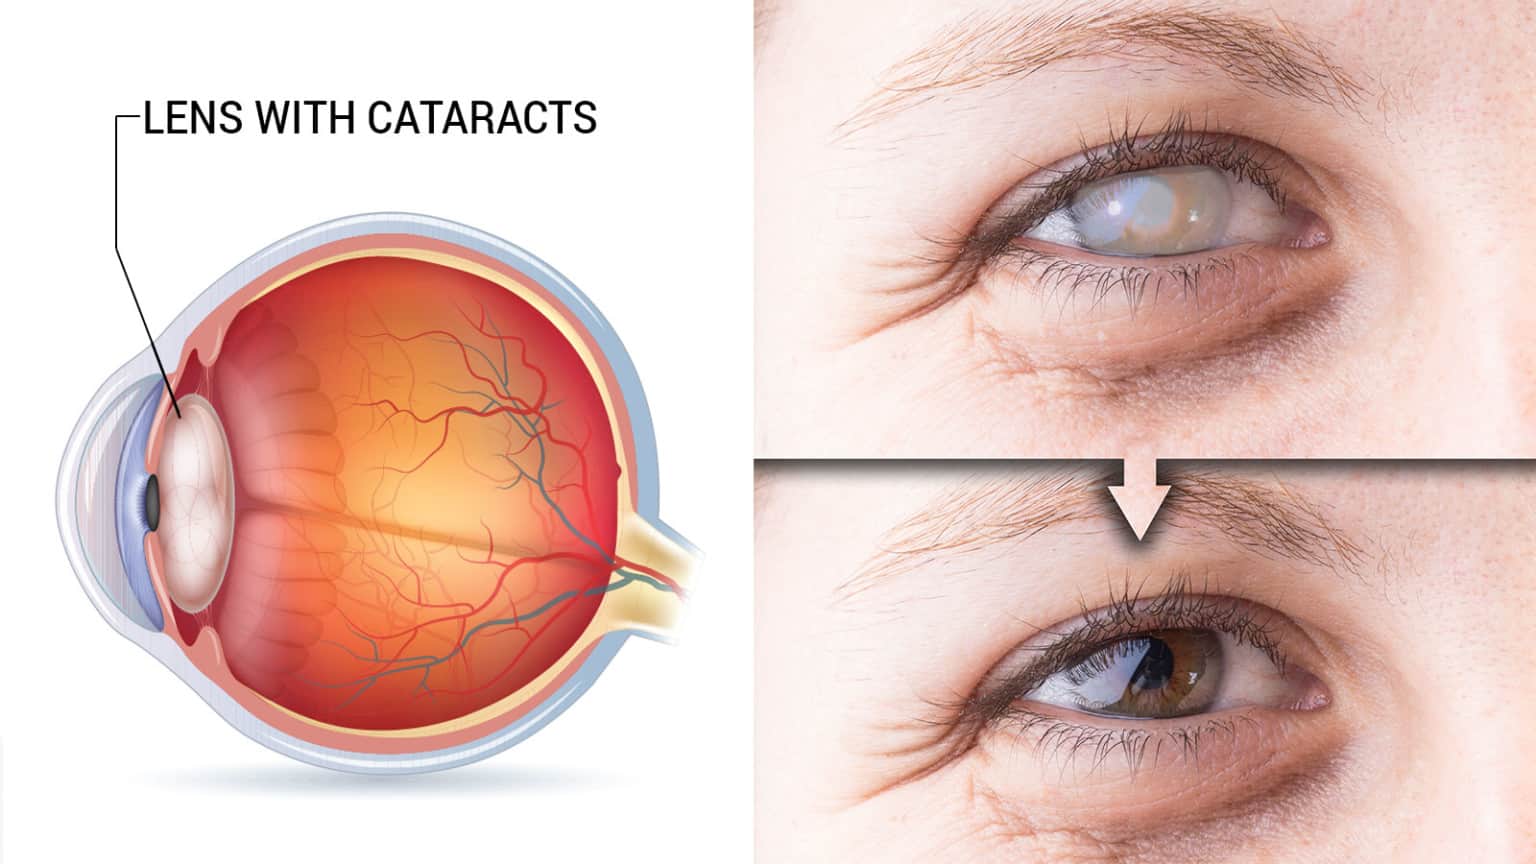 Ophthalmologists Reveal the Causes and Symptoms of Cataracts